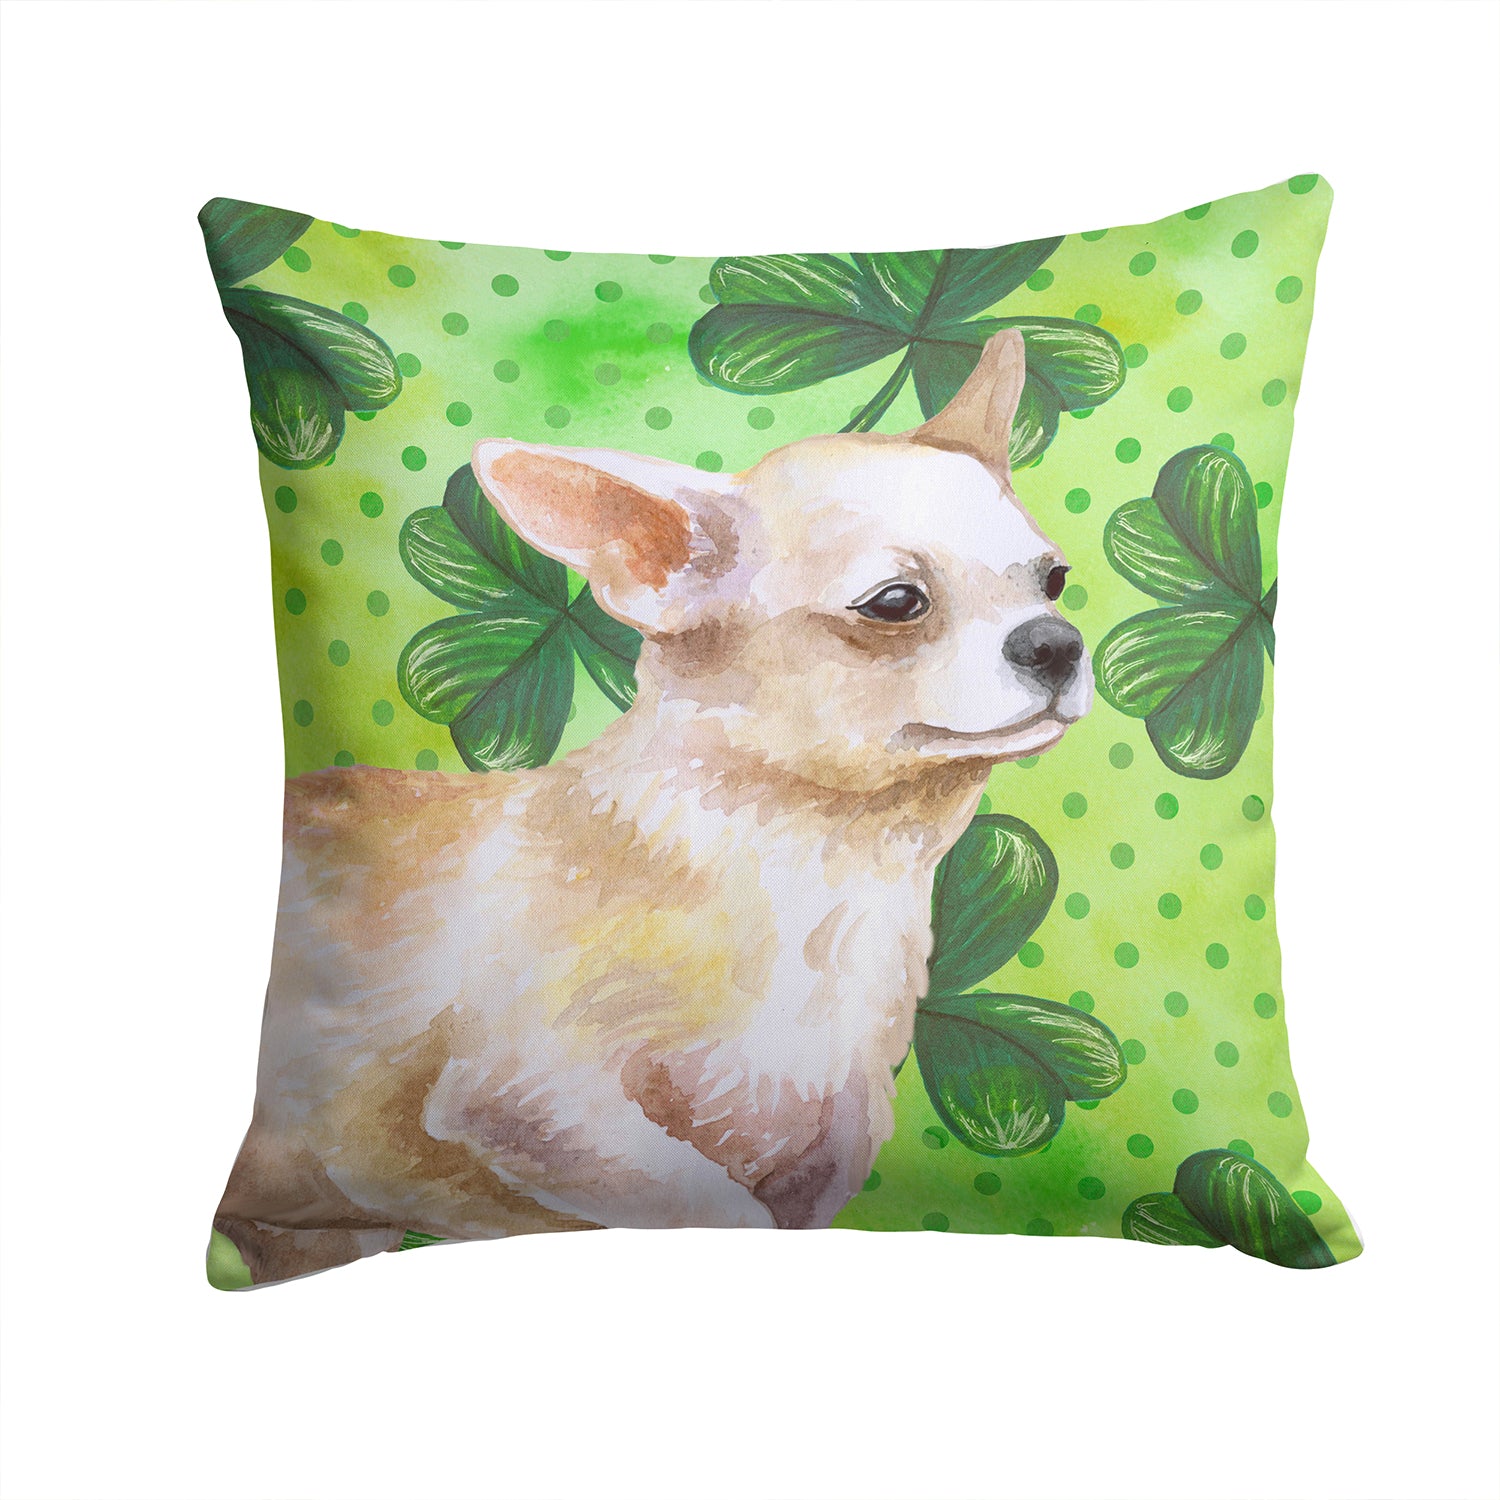 Chihuahua Leg up St Patrick's Fabric Decorative Pillow BB9871PW1414 - the-store.com